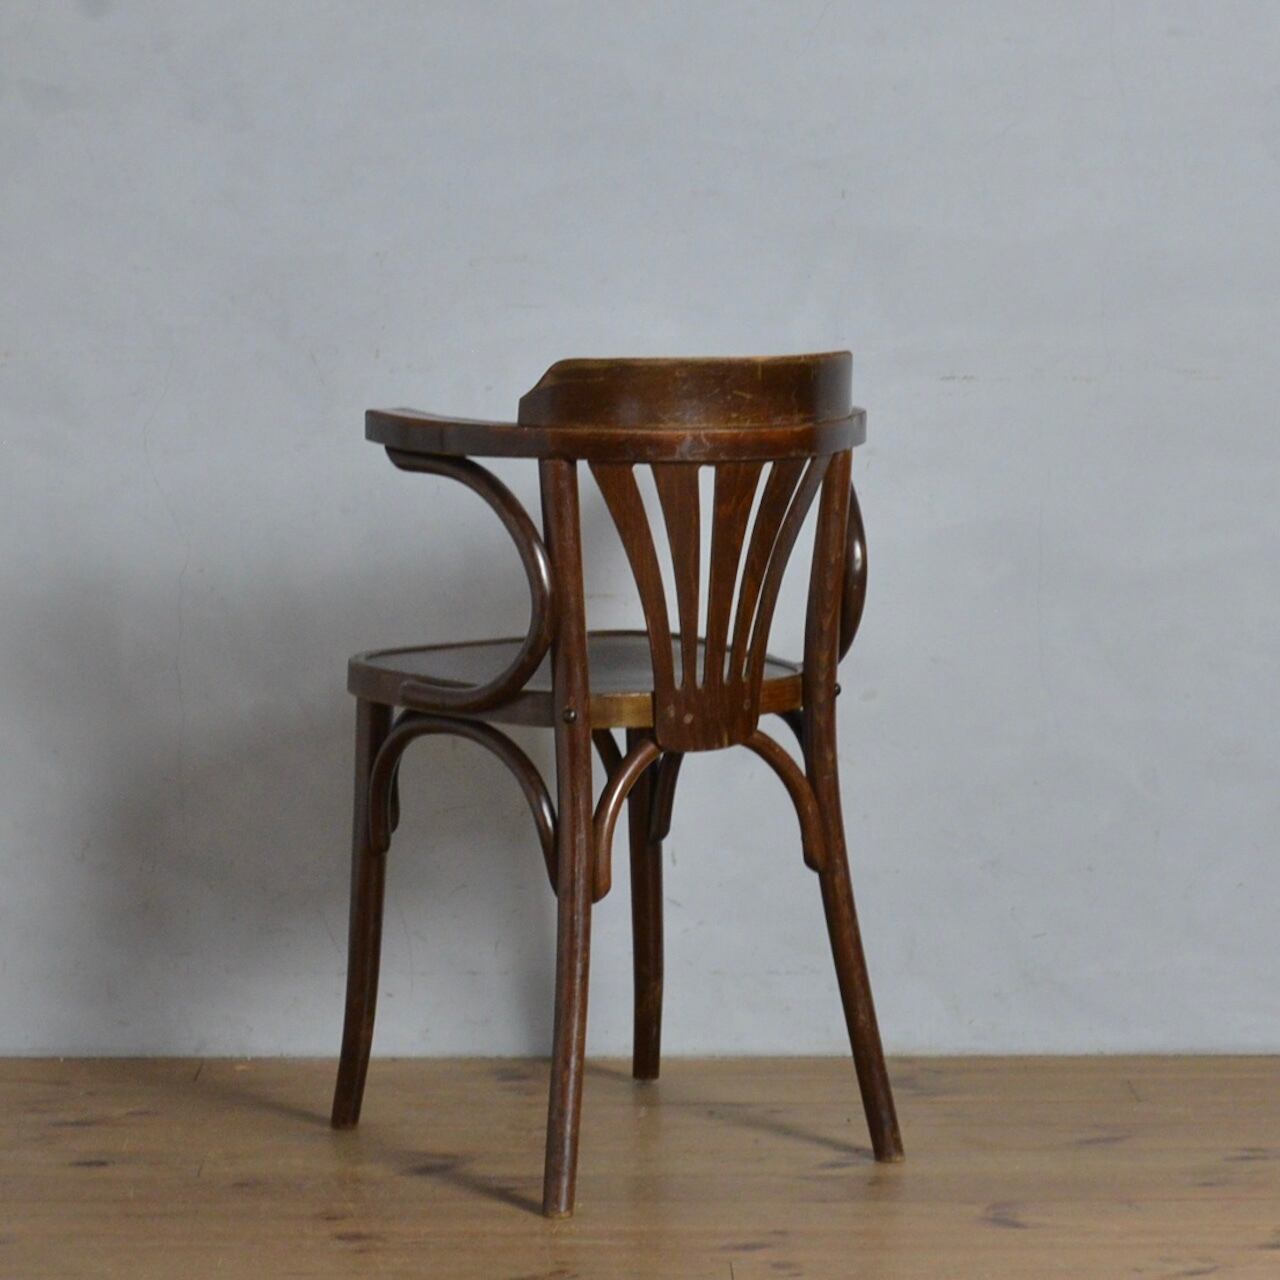 Bentwood Arm Chair / ベントウッド  アームチェア【A】〈ダイニングチェア・デスクチェア・曲木・トーネット・THONET・アンティーク〉112294 | SHABBY'S  MARKETPLACE　アンティーク・ヴィンテージ 家具や雑貨のお店 powered by BASE